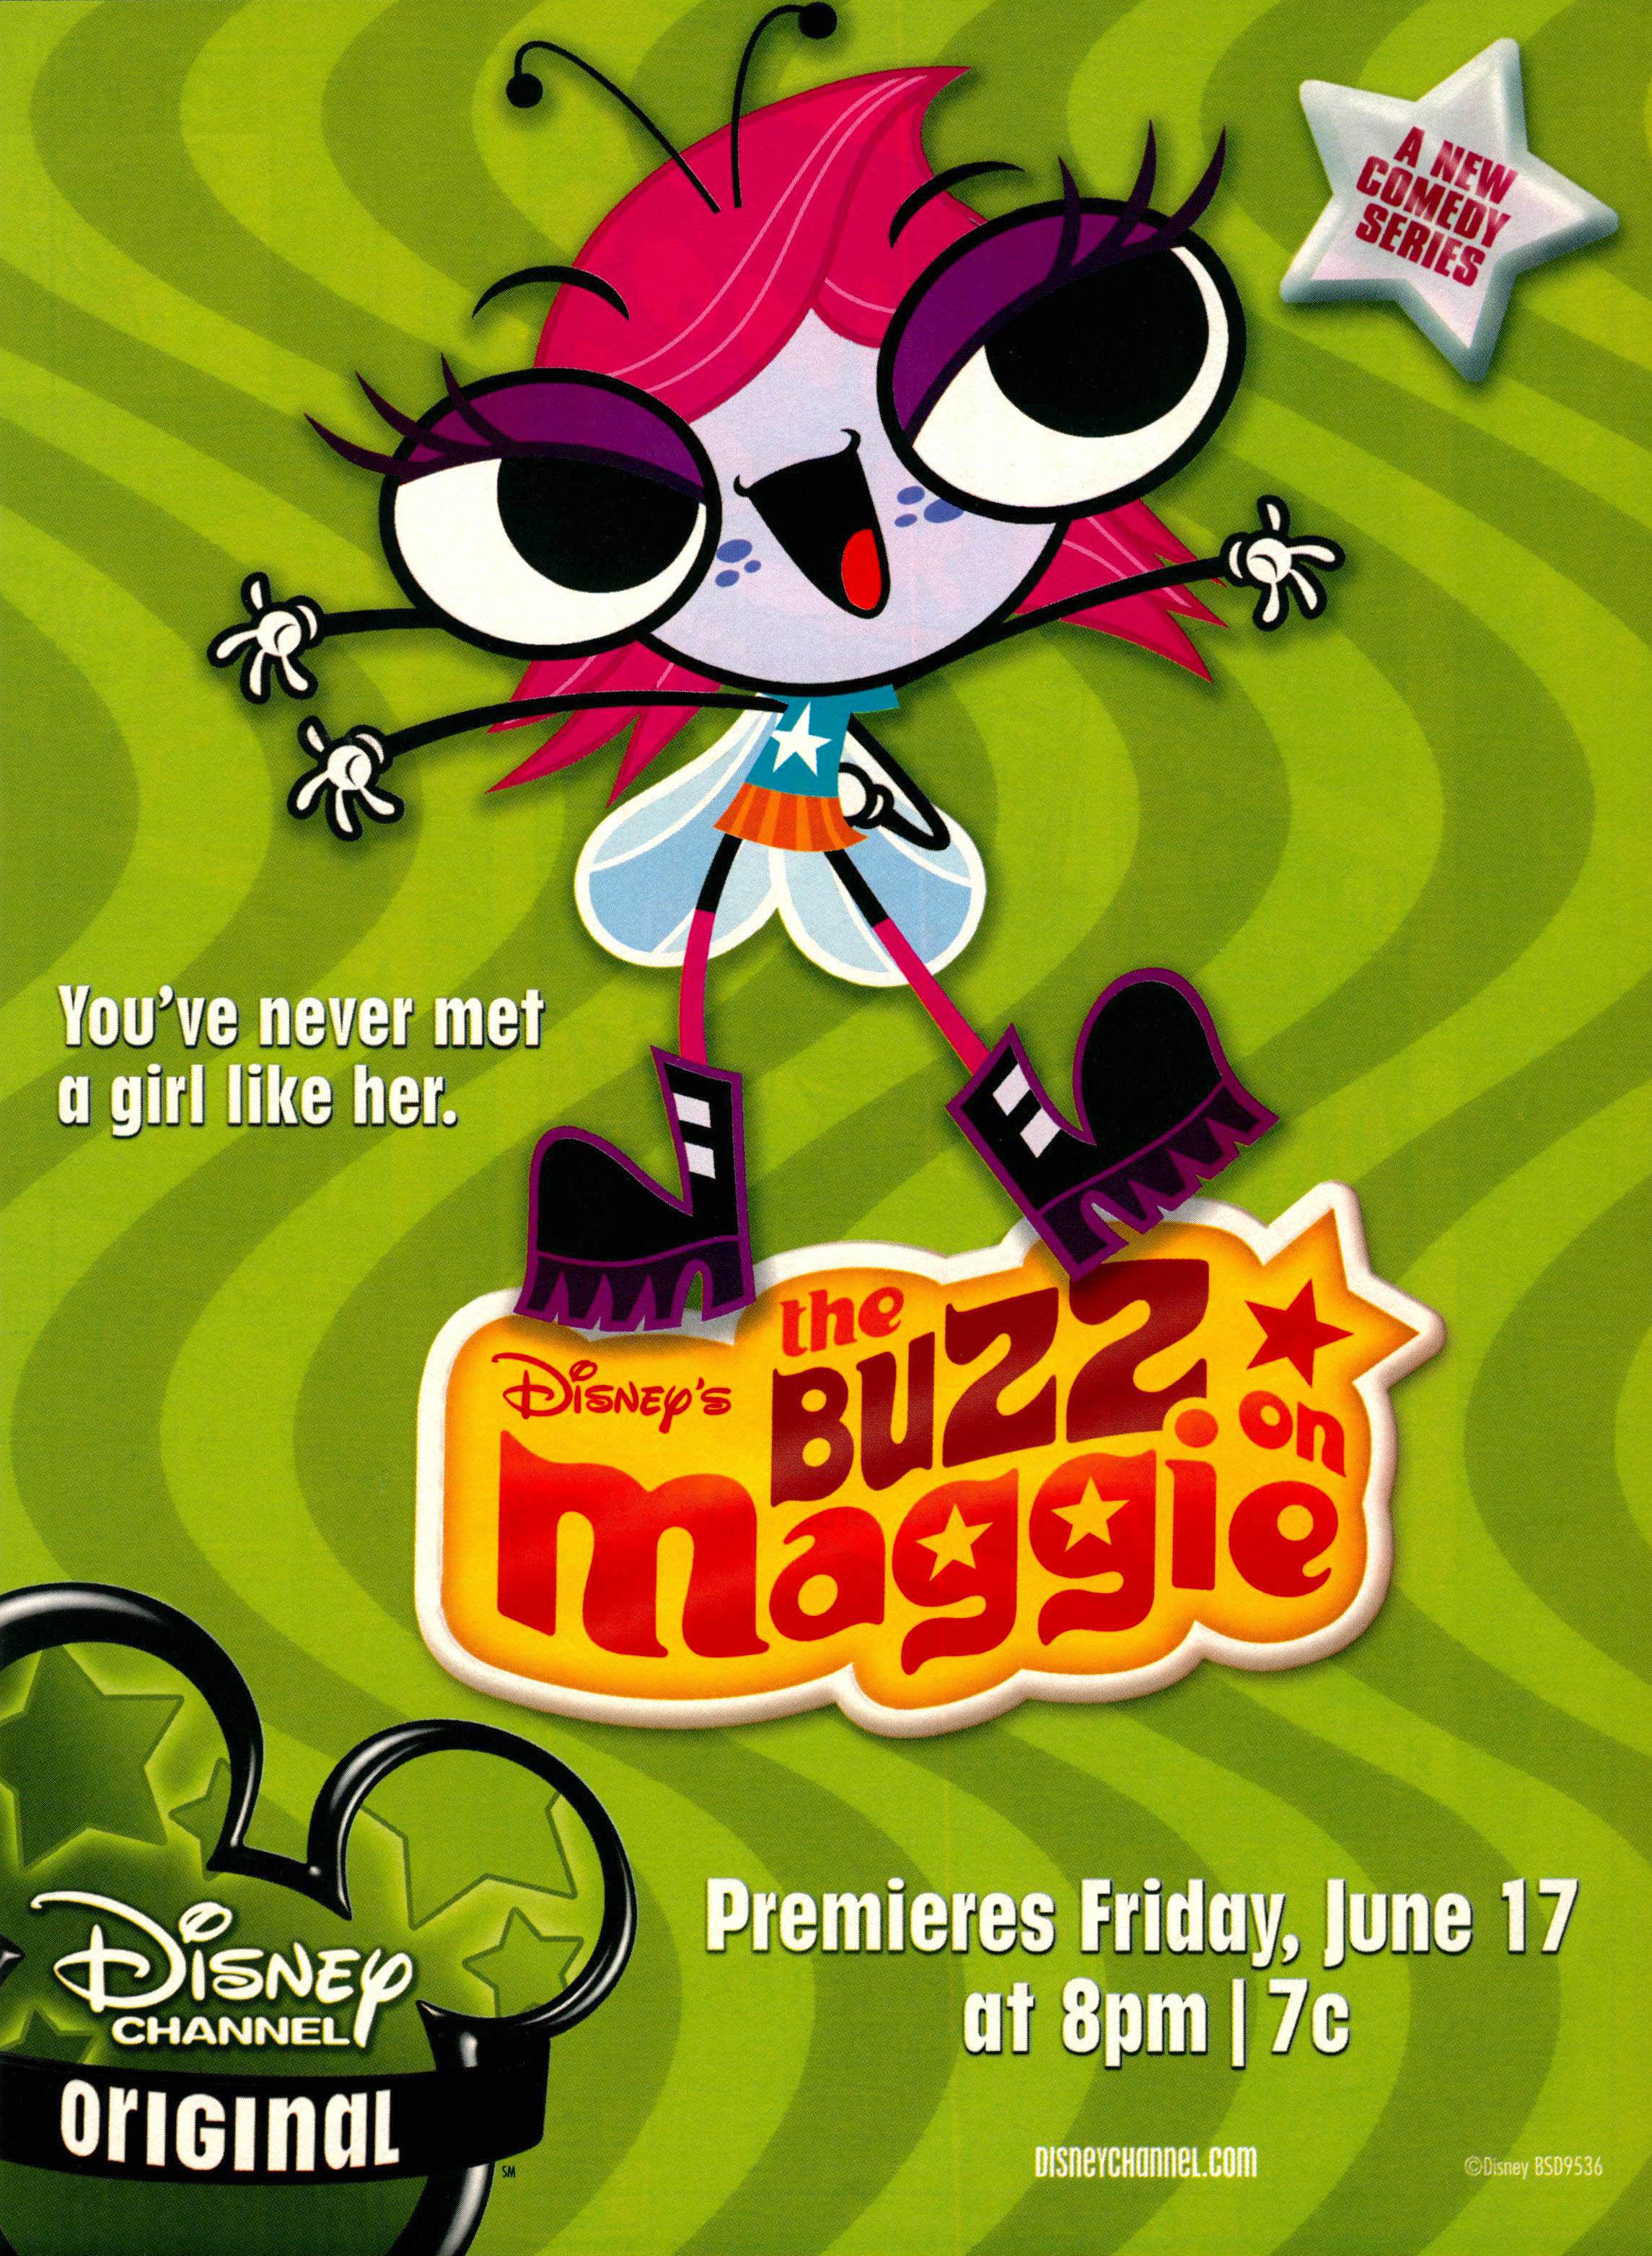 The_Buzz_on_Maggie_print_ad_NickMag_June_July_2005.jpg.